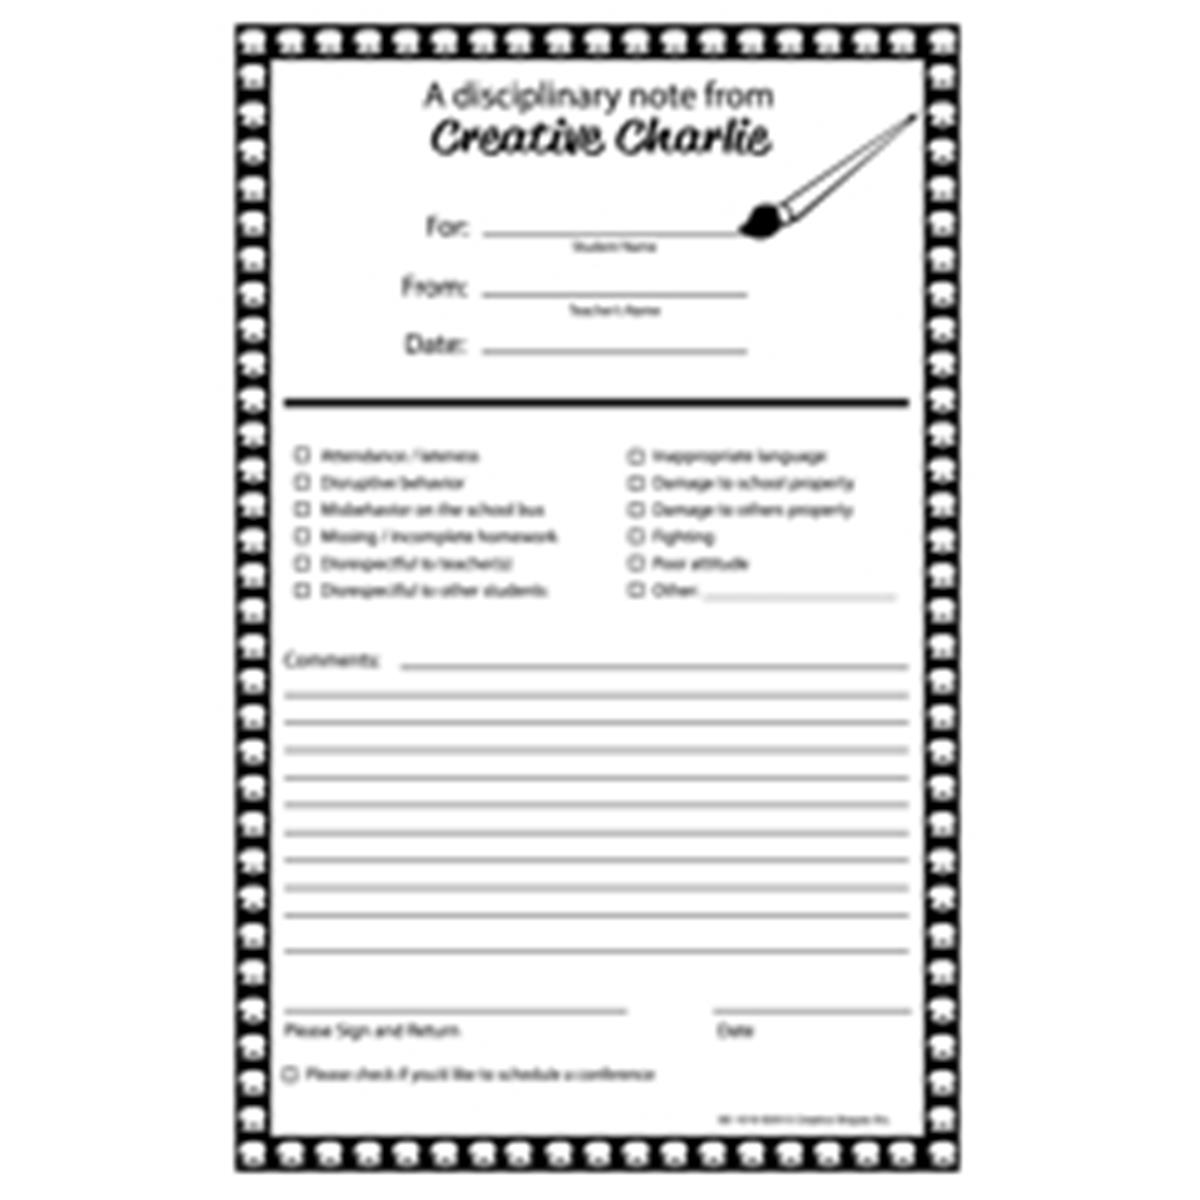 Se-1019 8.5 X 5.5 In. Notes From Creative Charlie, Primary Disciplinary - 50 Sheets Per Pack